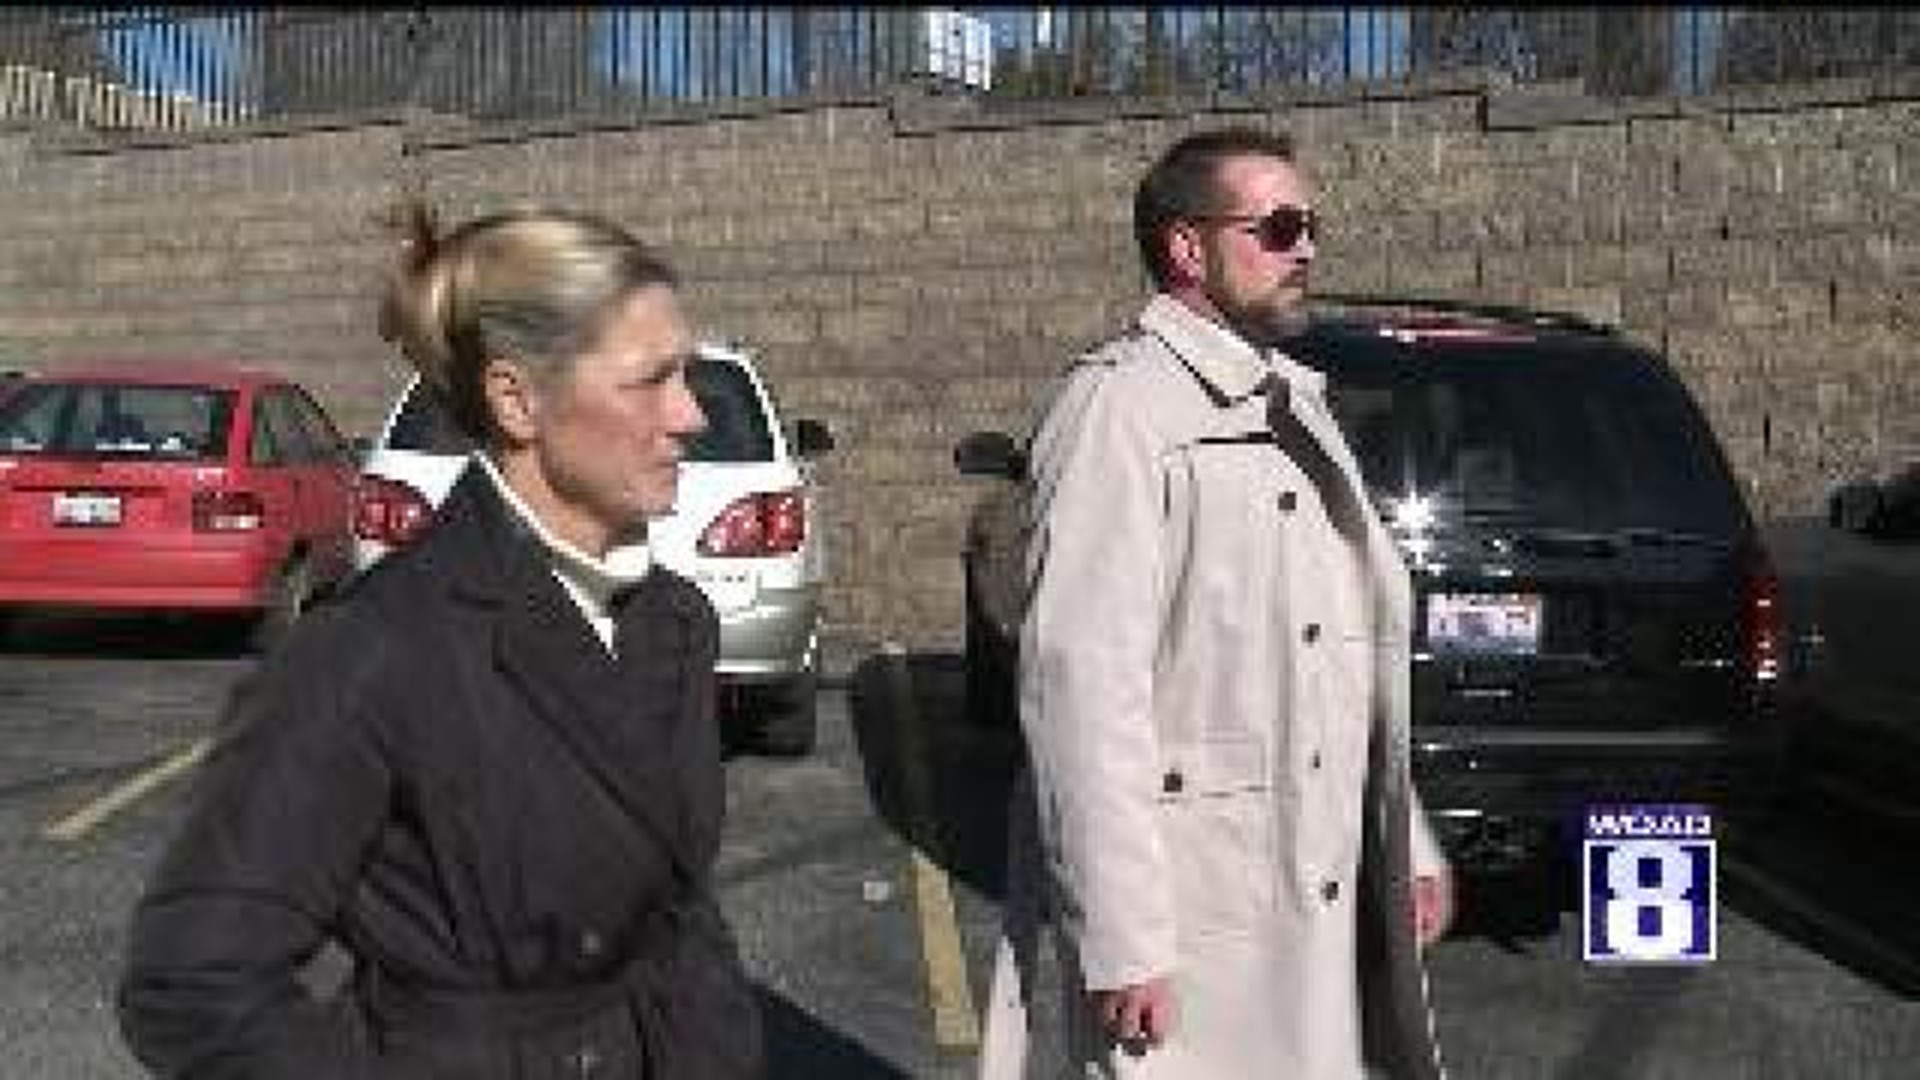 Crundwell pleads not guilty